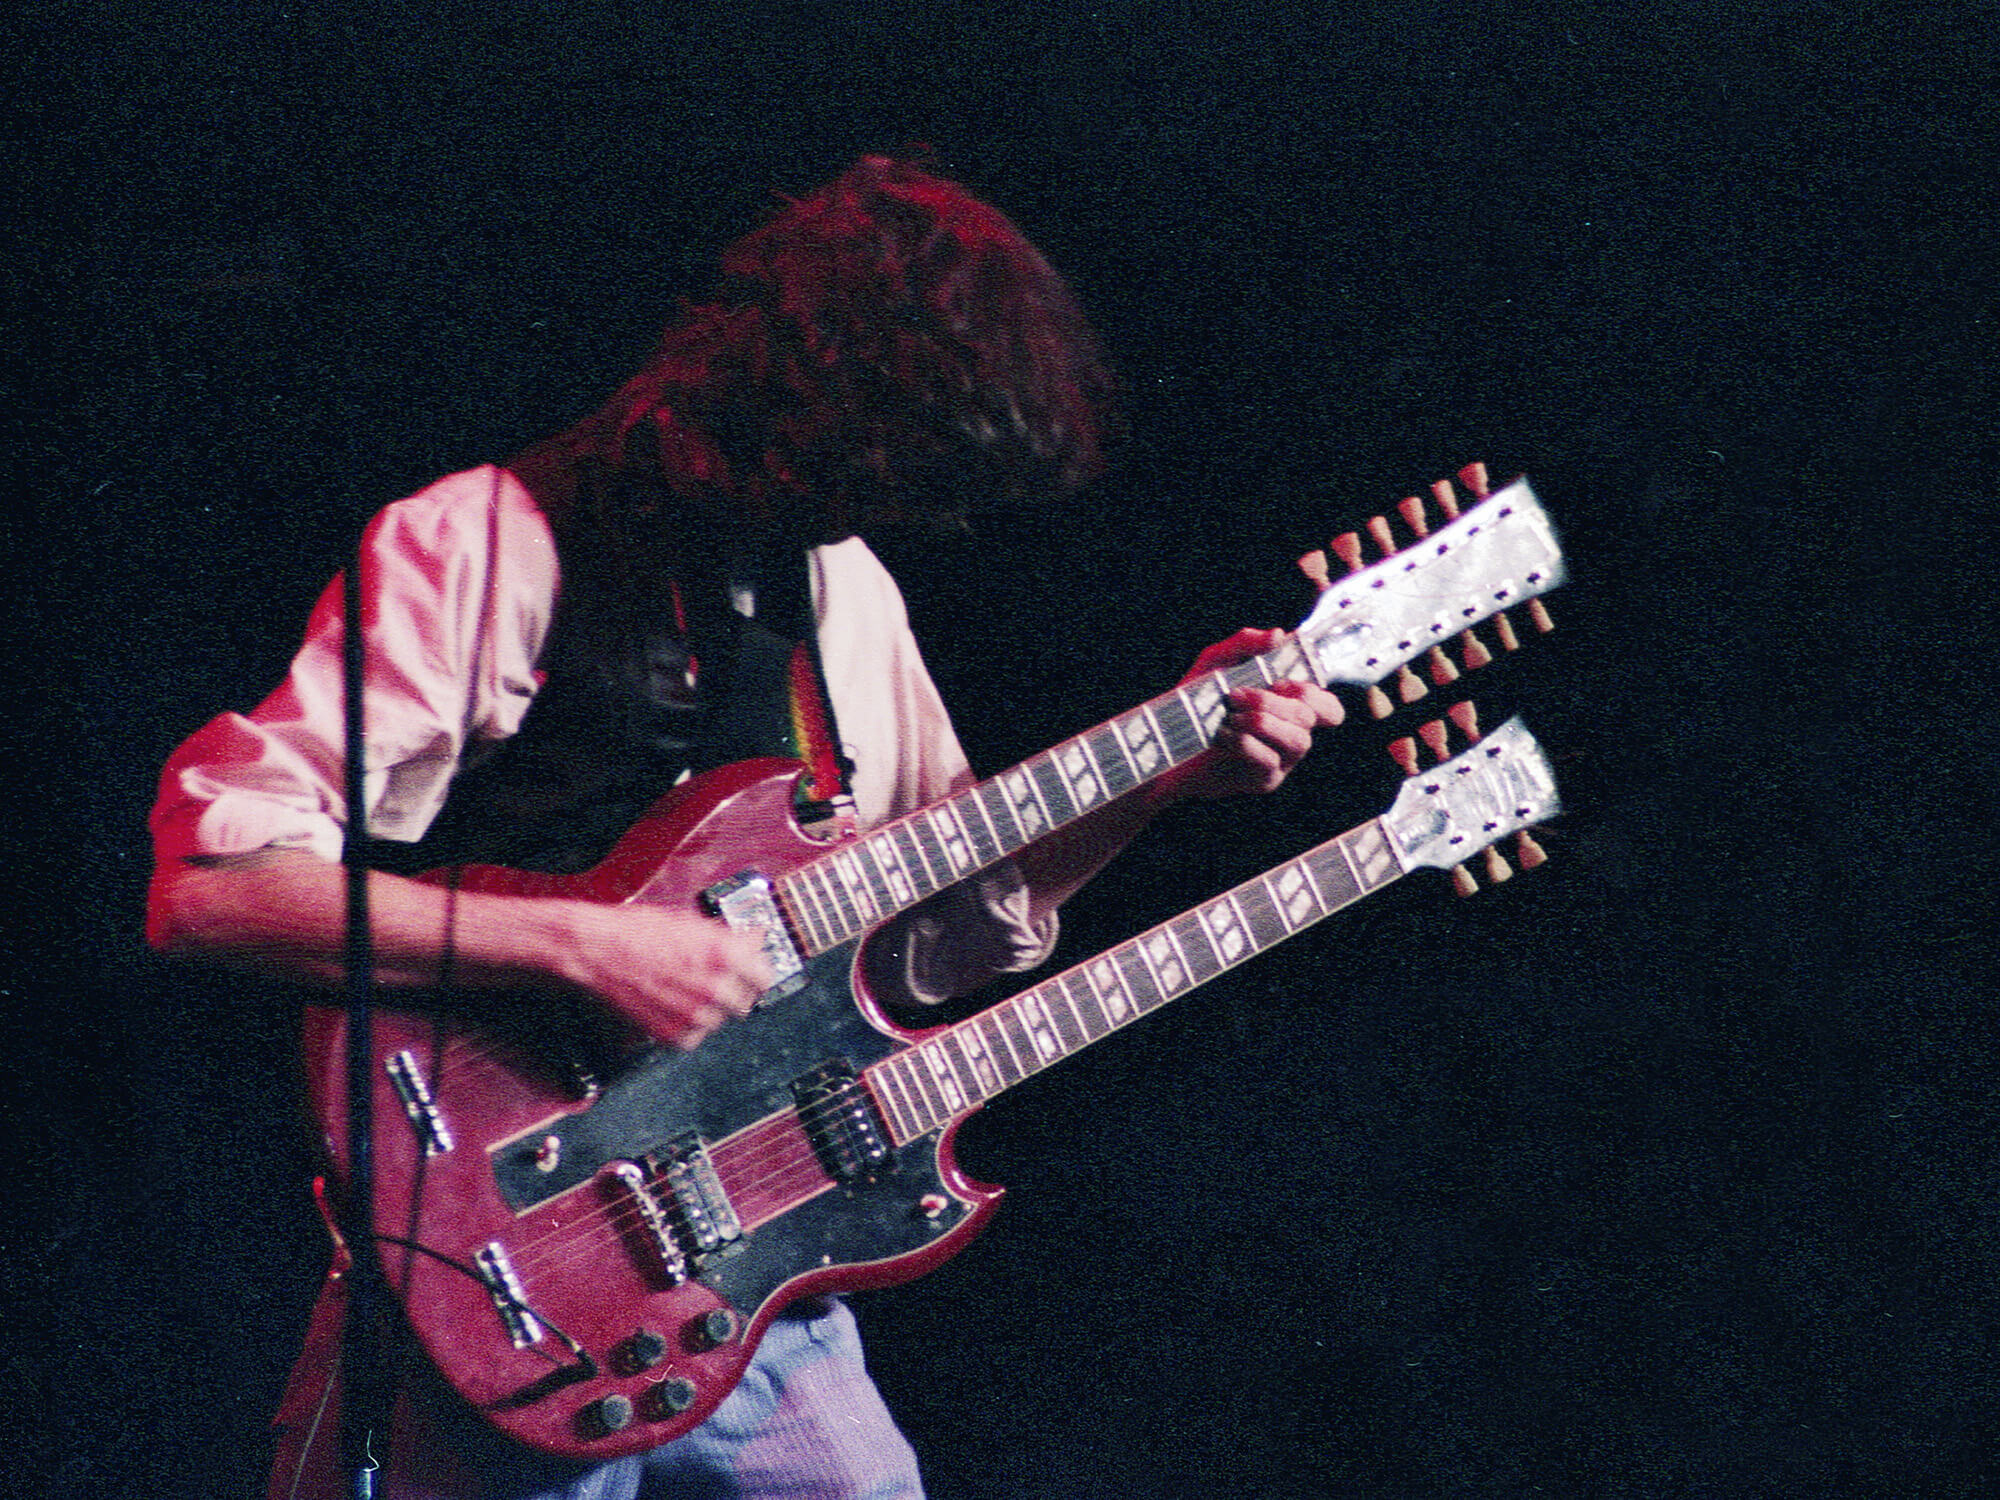 Jimmy Page of Led Zeppelin on stage in 1983